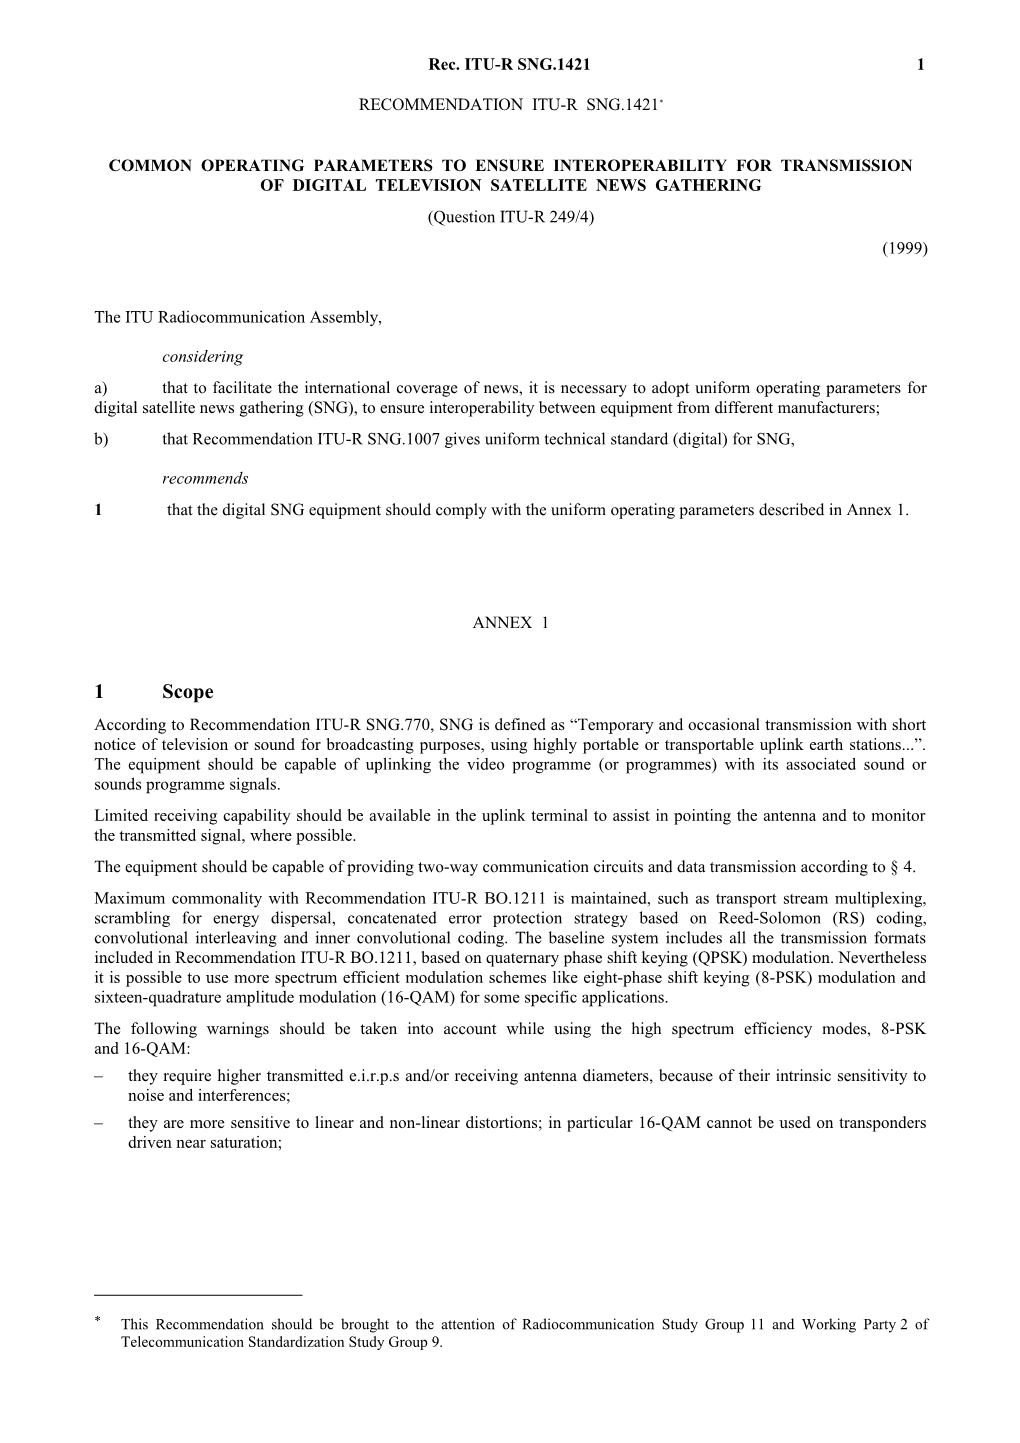 SNG.1421 - Common Operating Parameters to Ensure Interoperability for Transmission of Digital